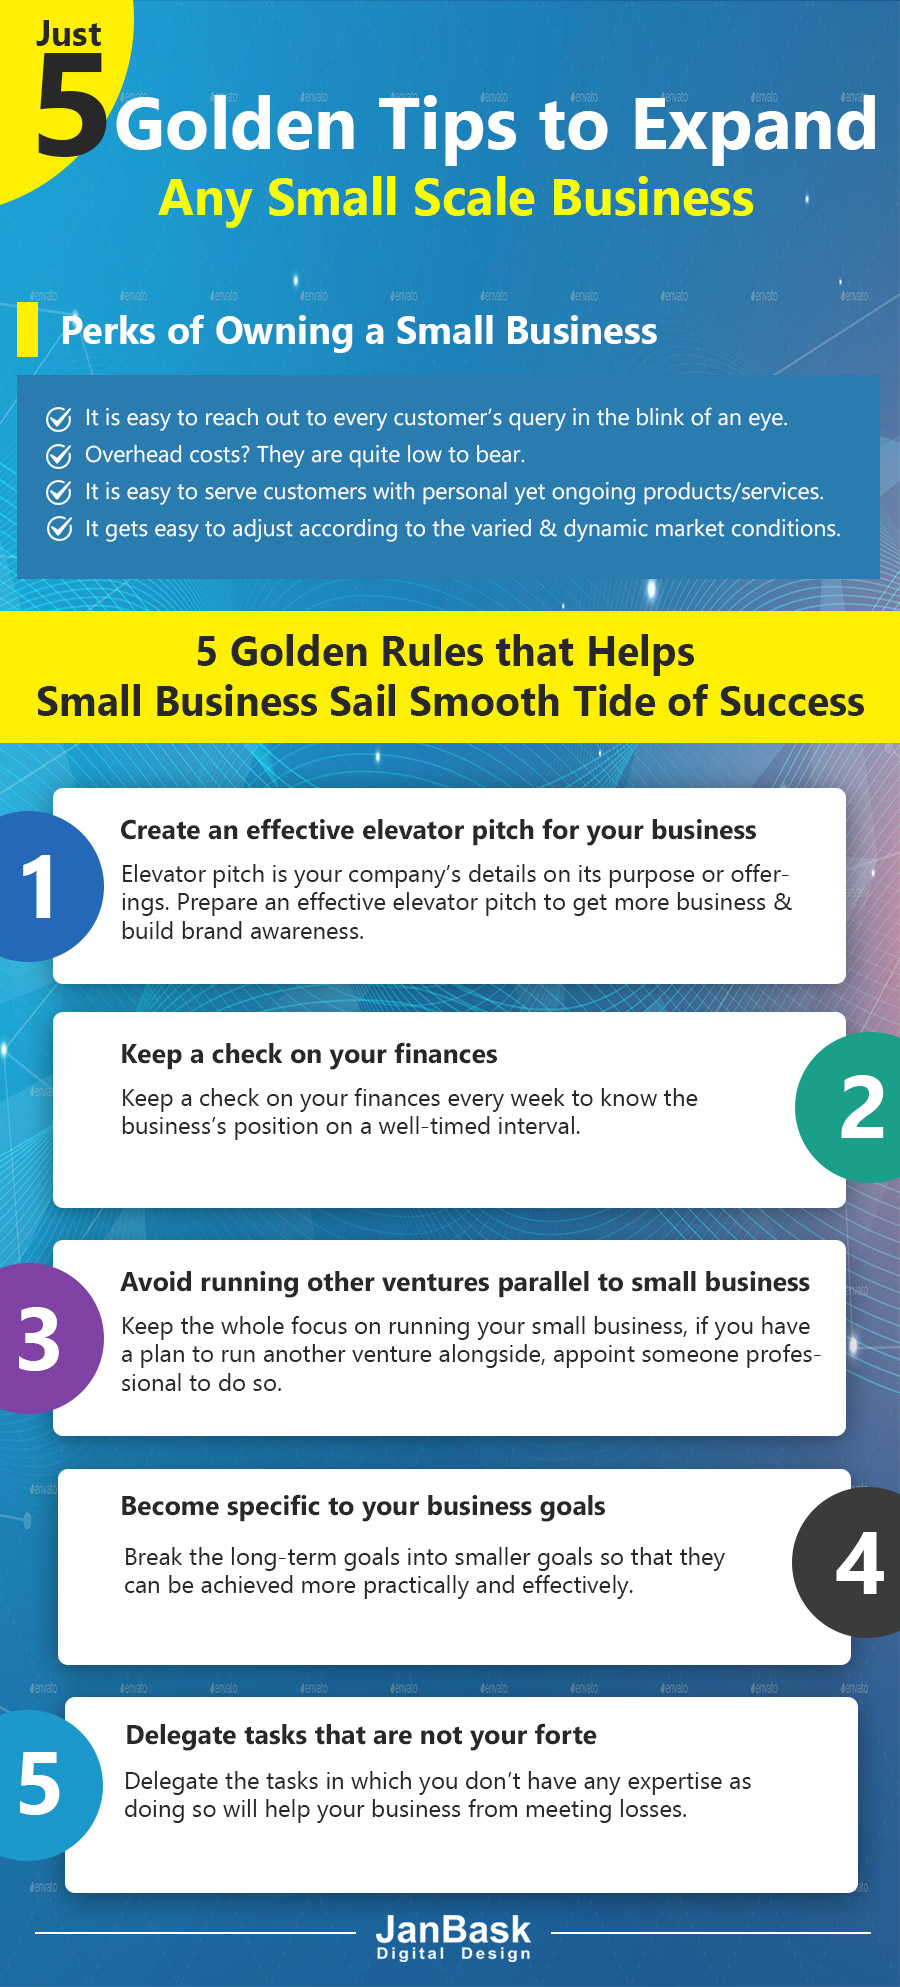 Tips and Advice for Small Business Owners